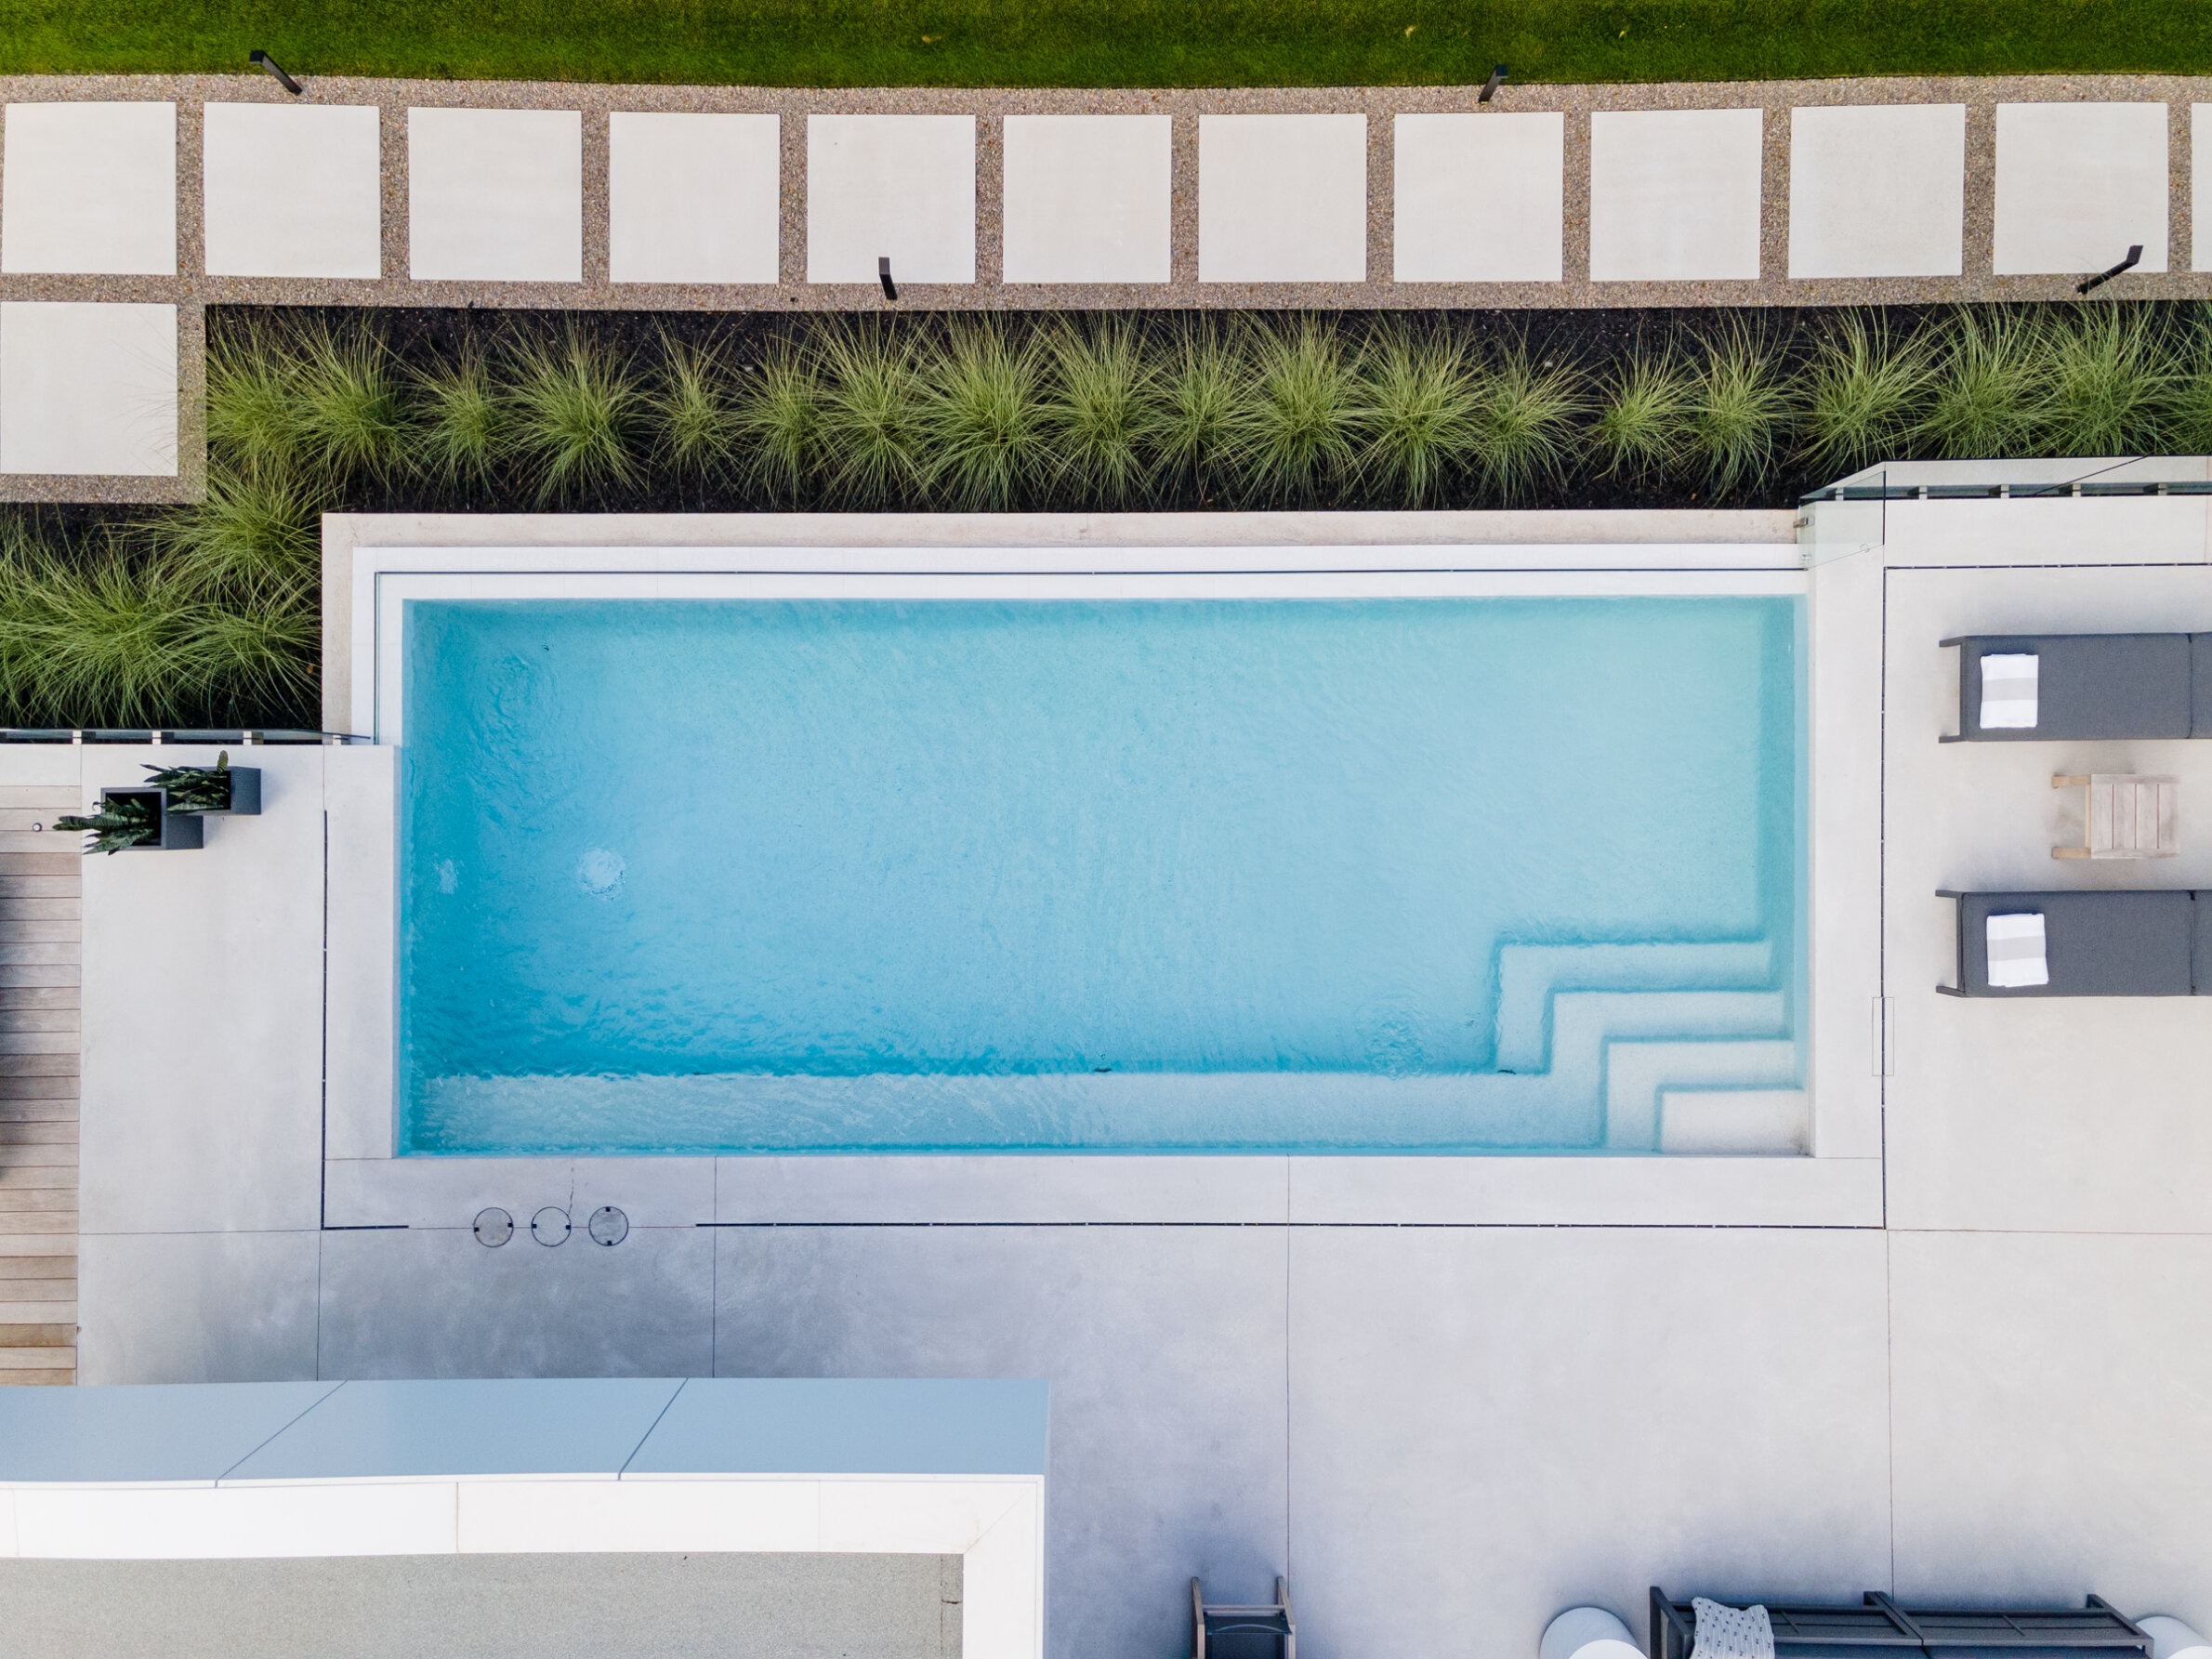 Aerial view of a modern backyard with a rectangular swimming pool, concrete patio, neatly arranged pavers, and ornamental grass landscaping.